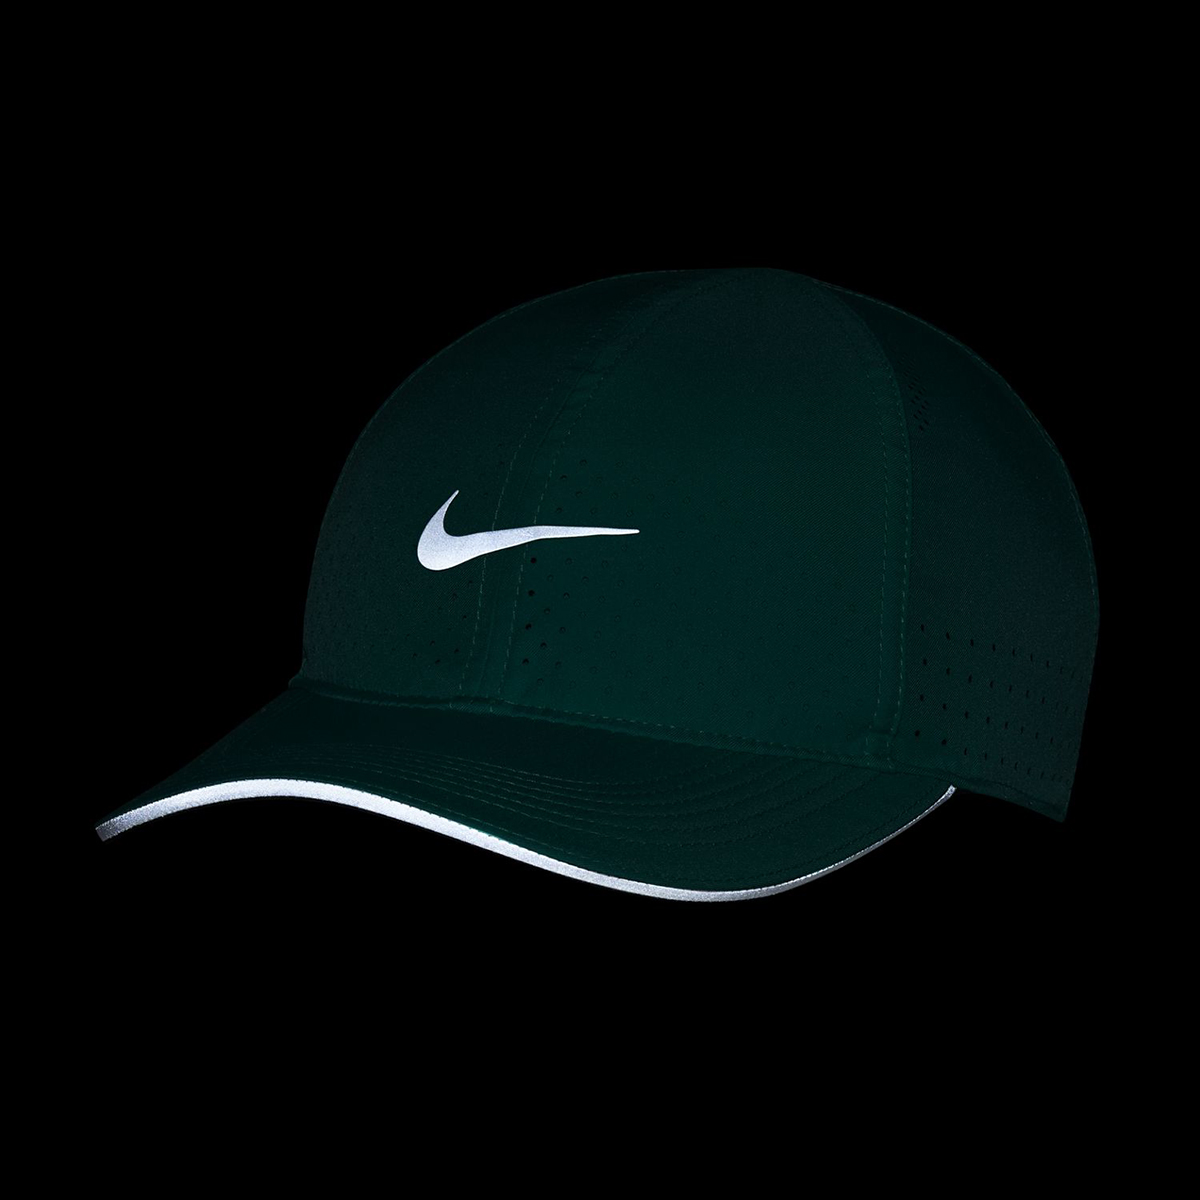 Nike Dri-FIT Aerobill Featherlight Cap, , large image number null